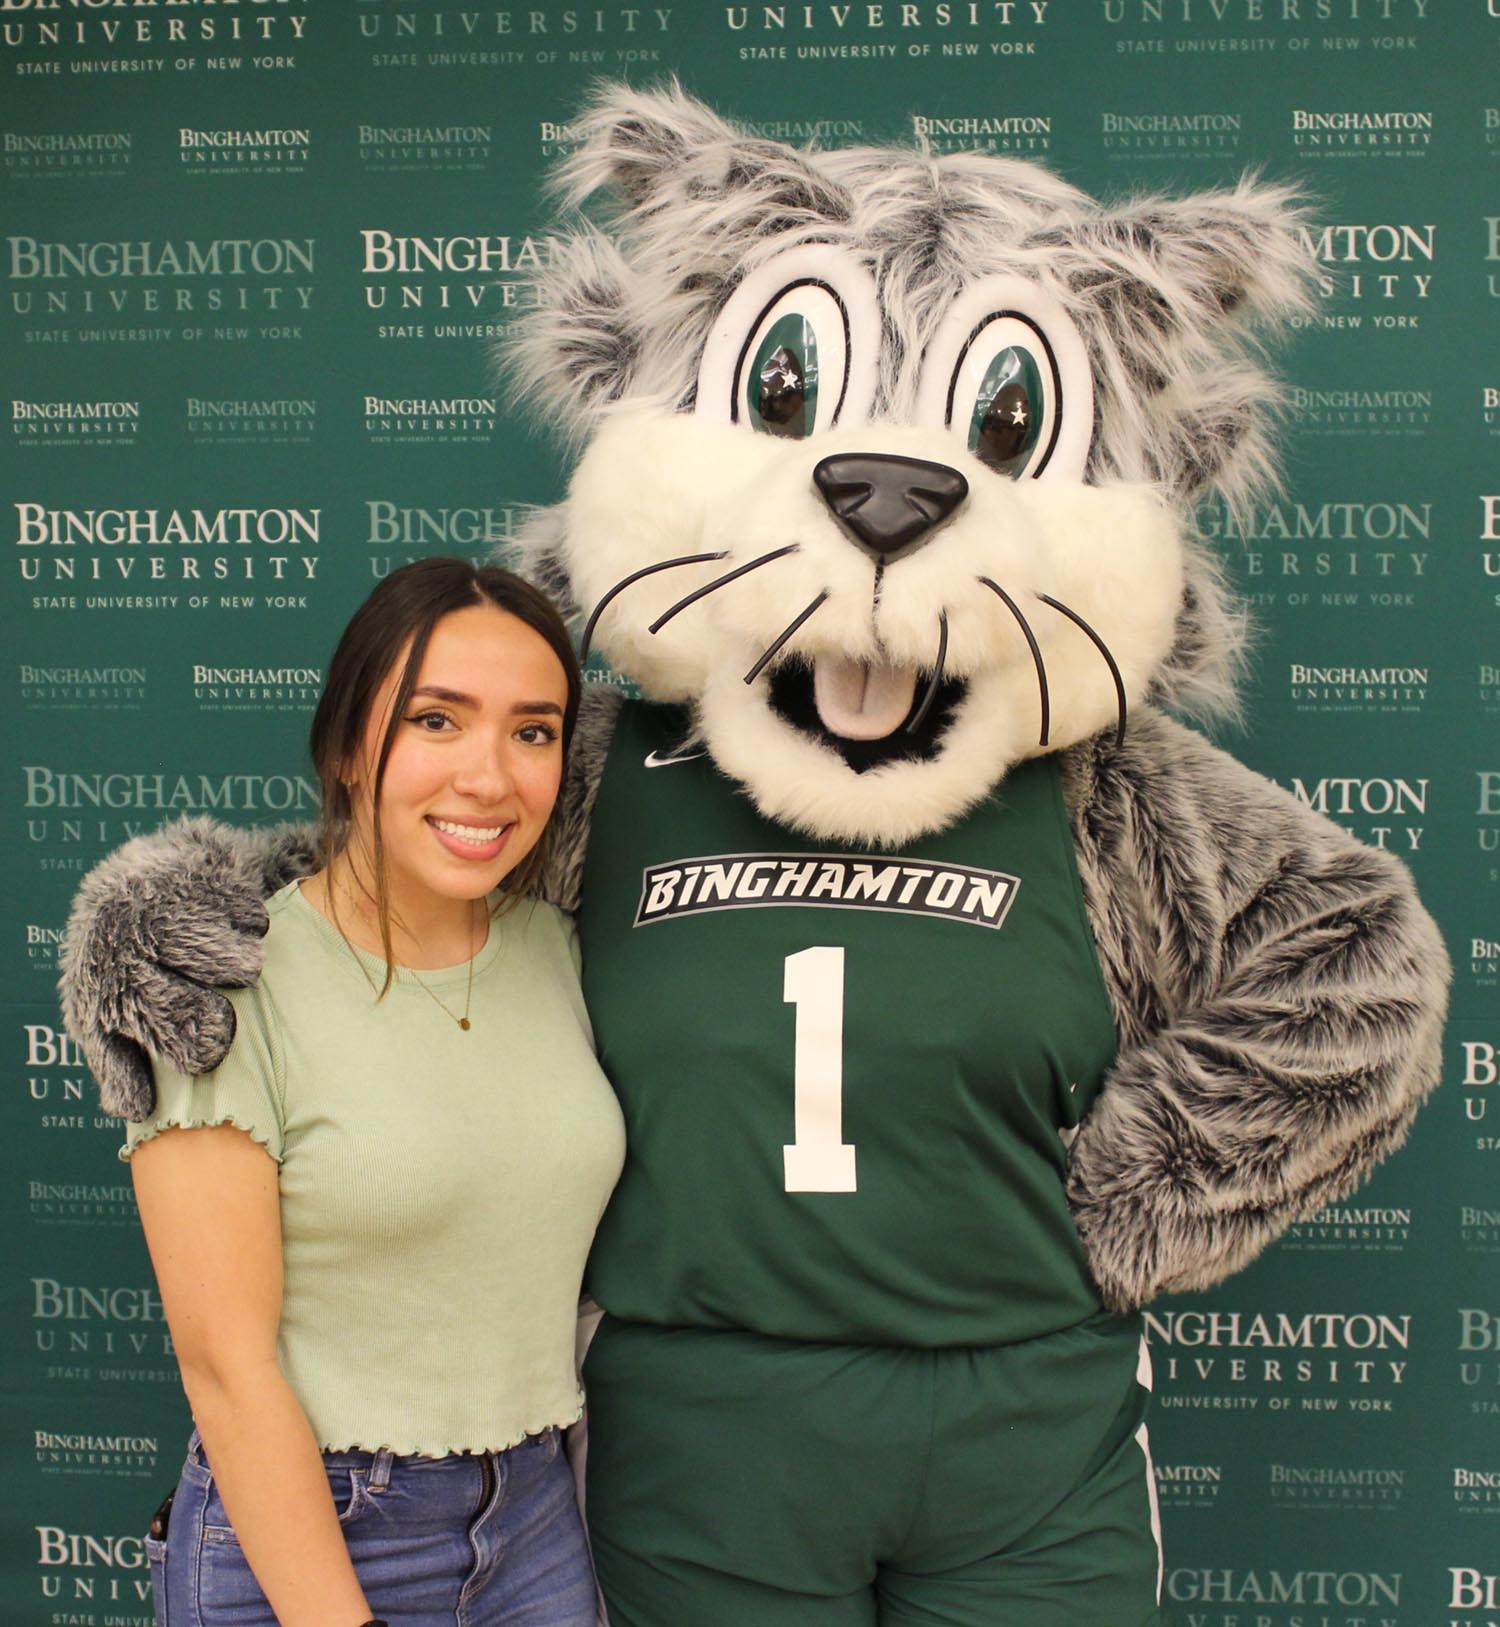 Vanessa Serna Villa hangs out with Baxter the Bearcat at the Watson Career and Alumni Connections graduation celebration in May 2022.